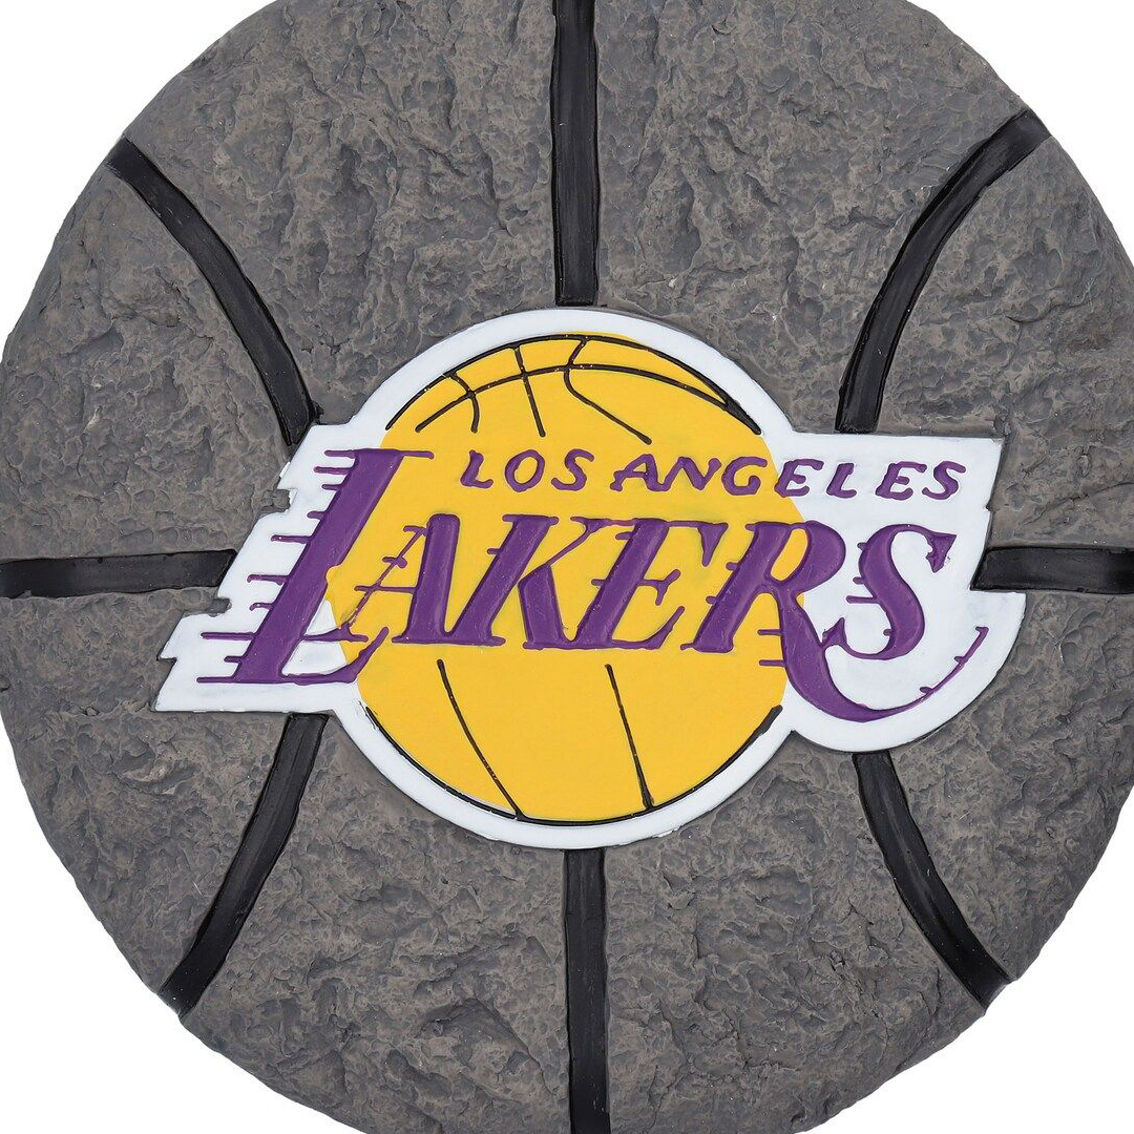 FOCO Los Angeles Lakers Ball Garden Stone - Image 2 of 2